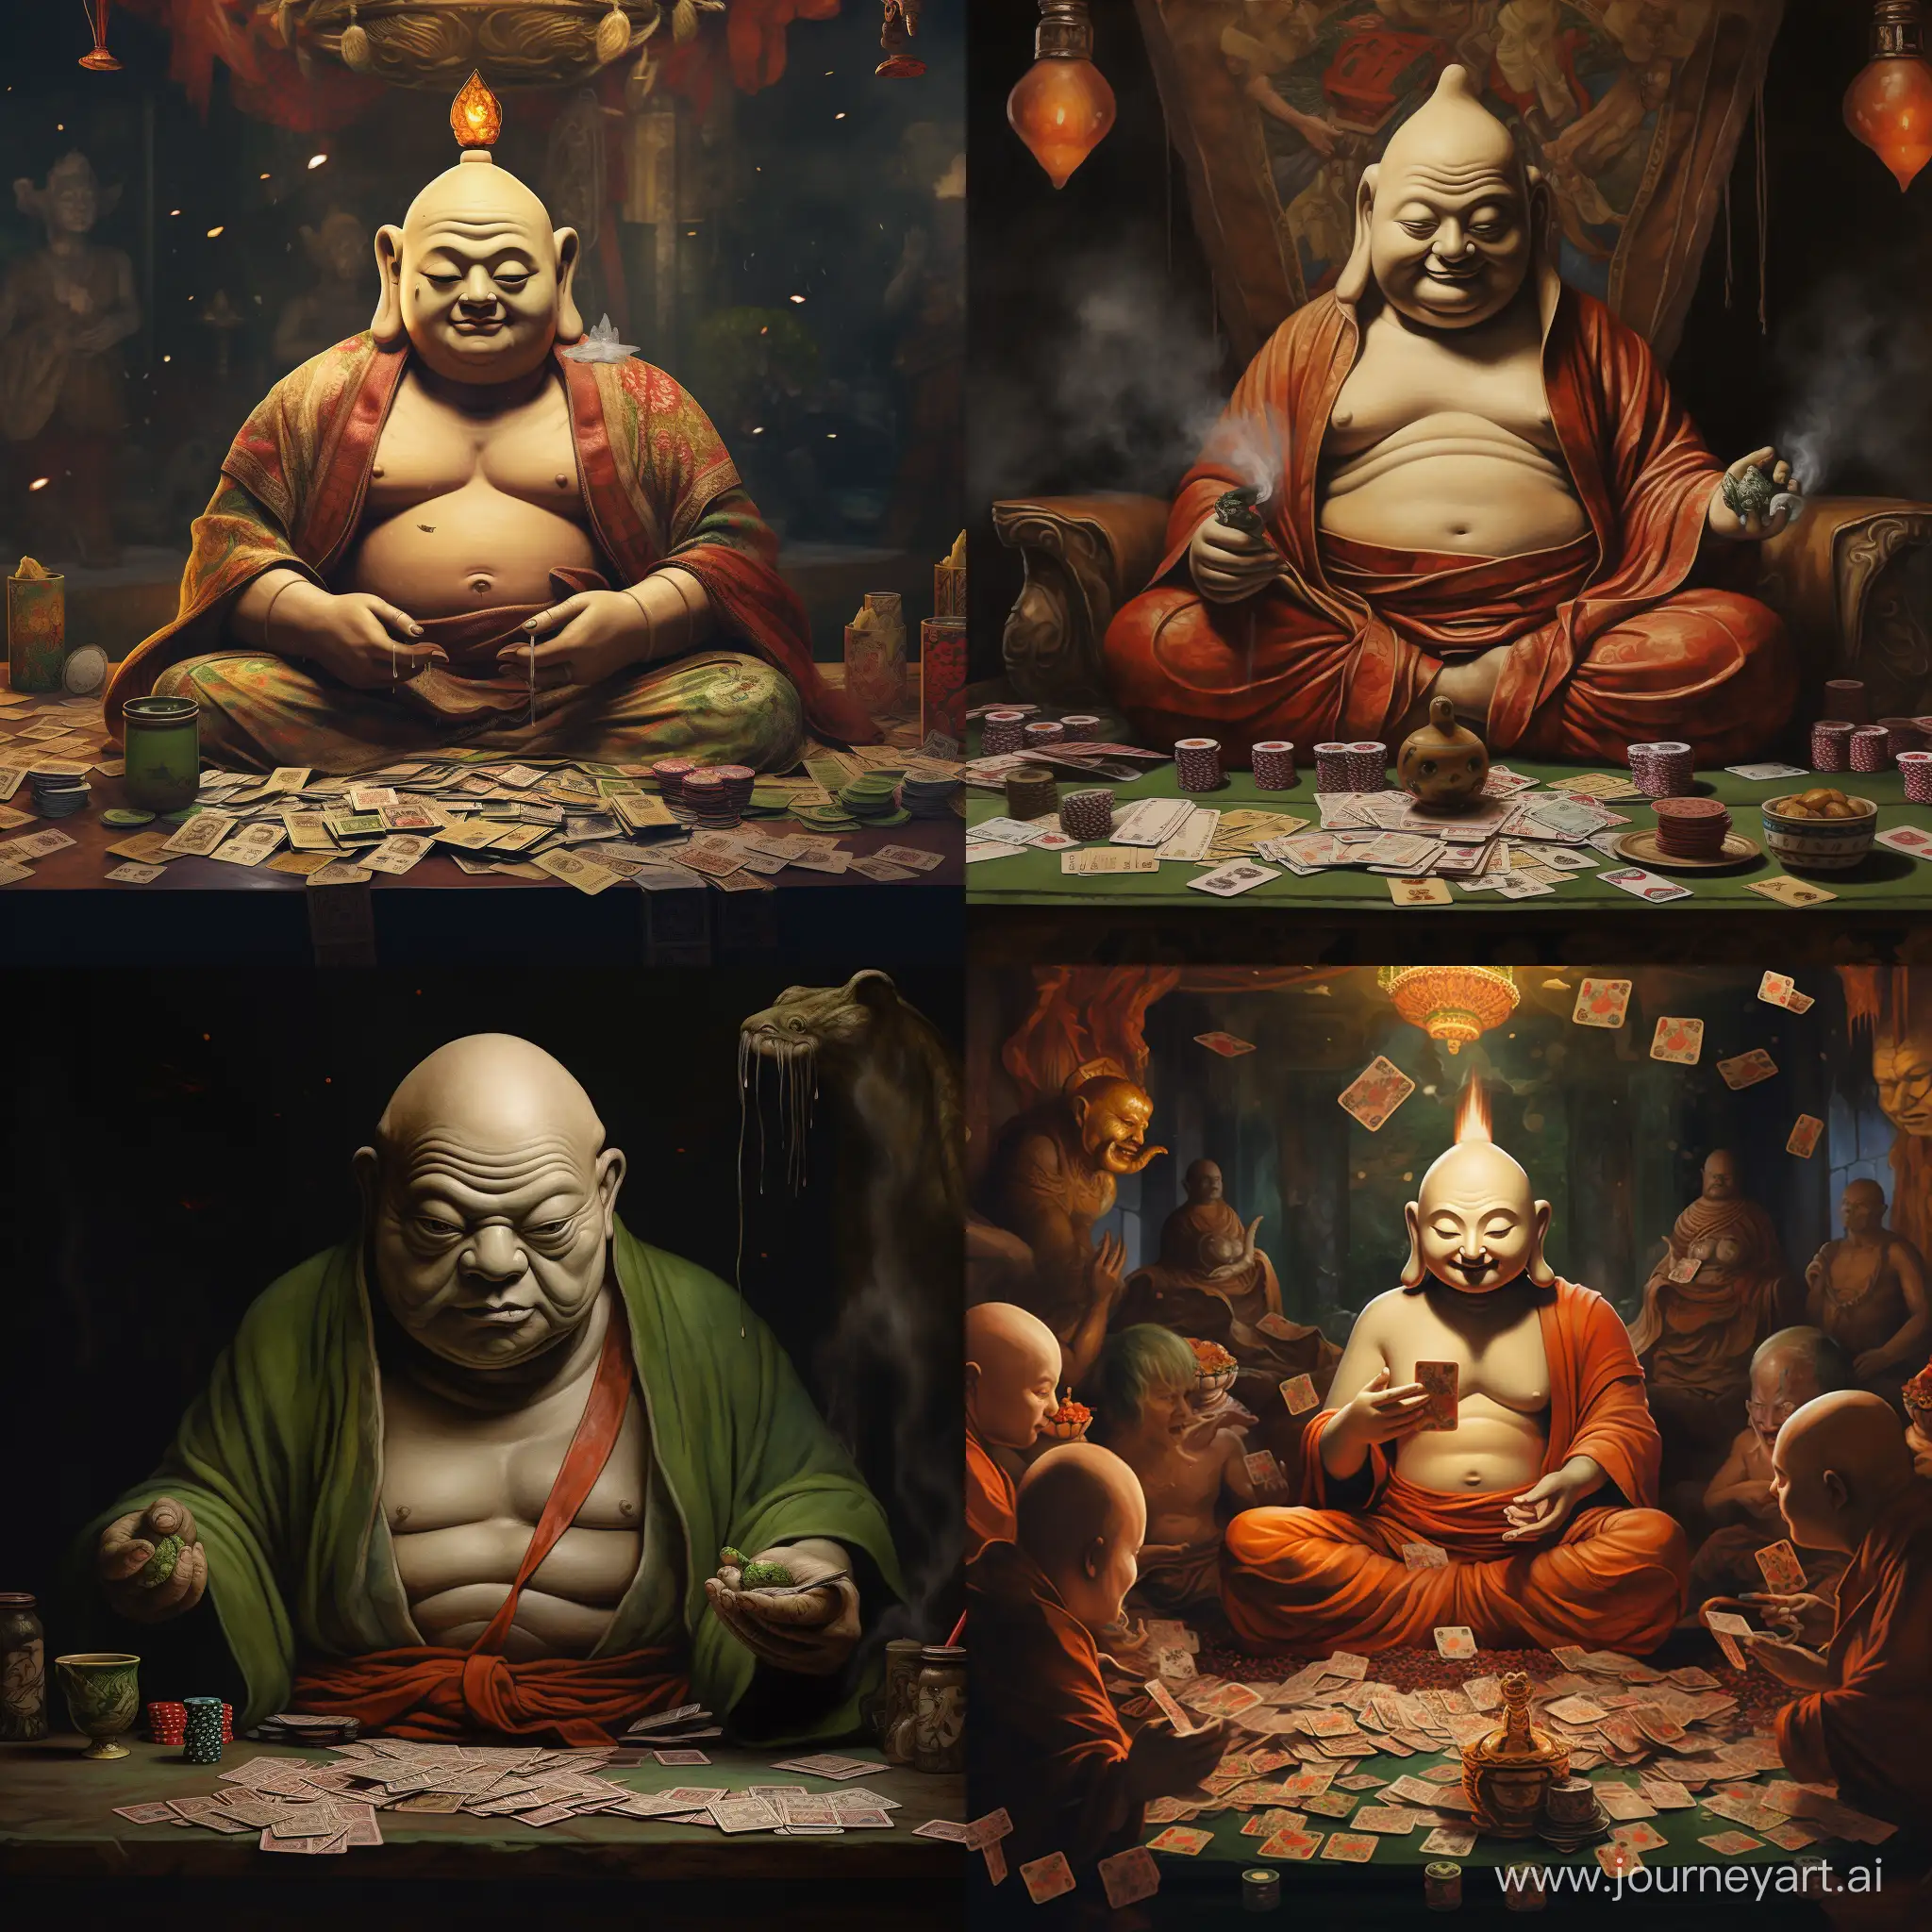 Buddha-Playing-Poker-Art-Serene-Enlightenment-in-a-HighStakes-Game